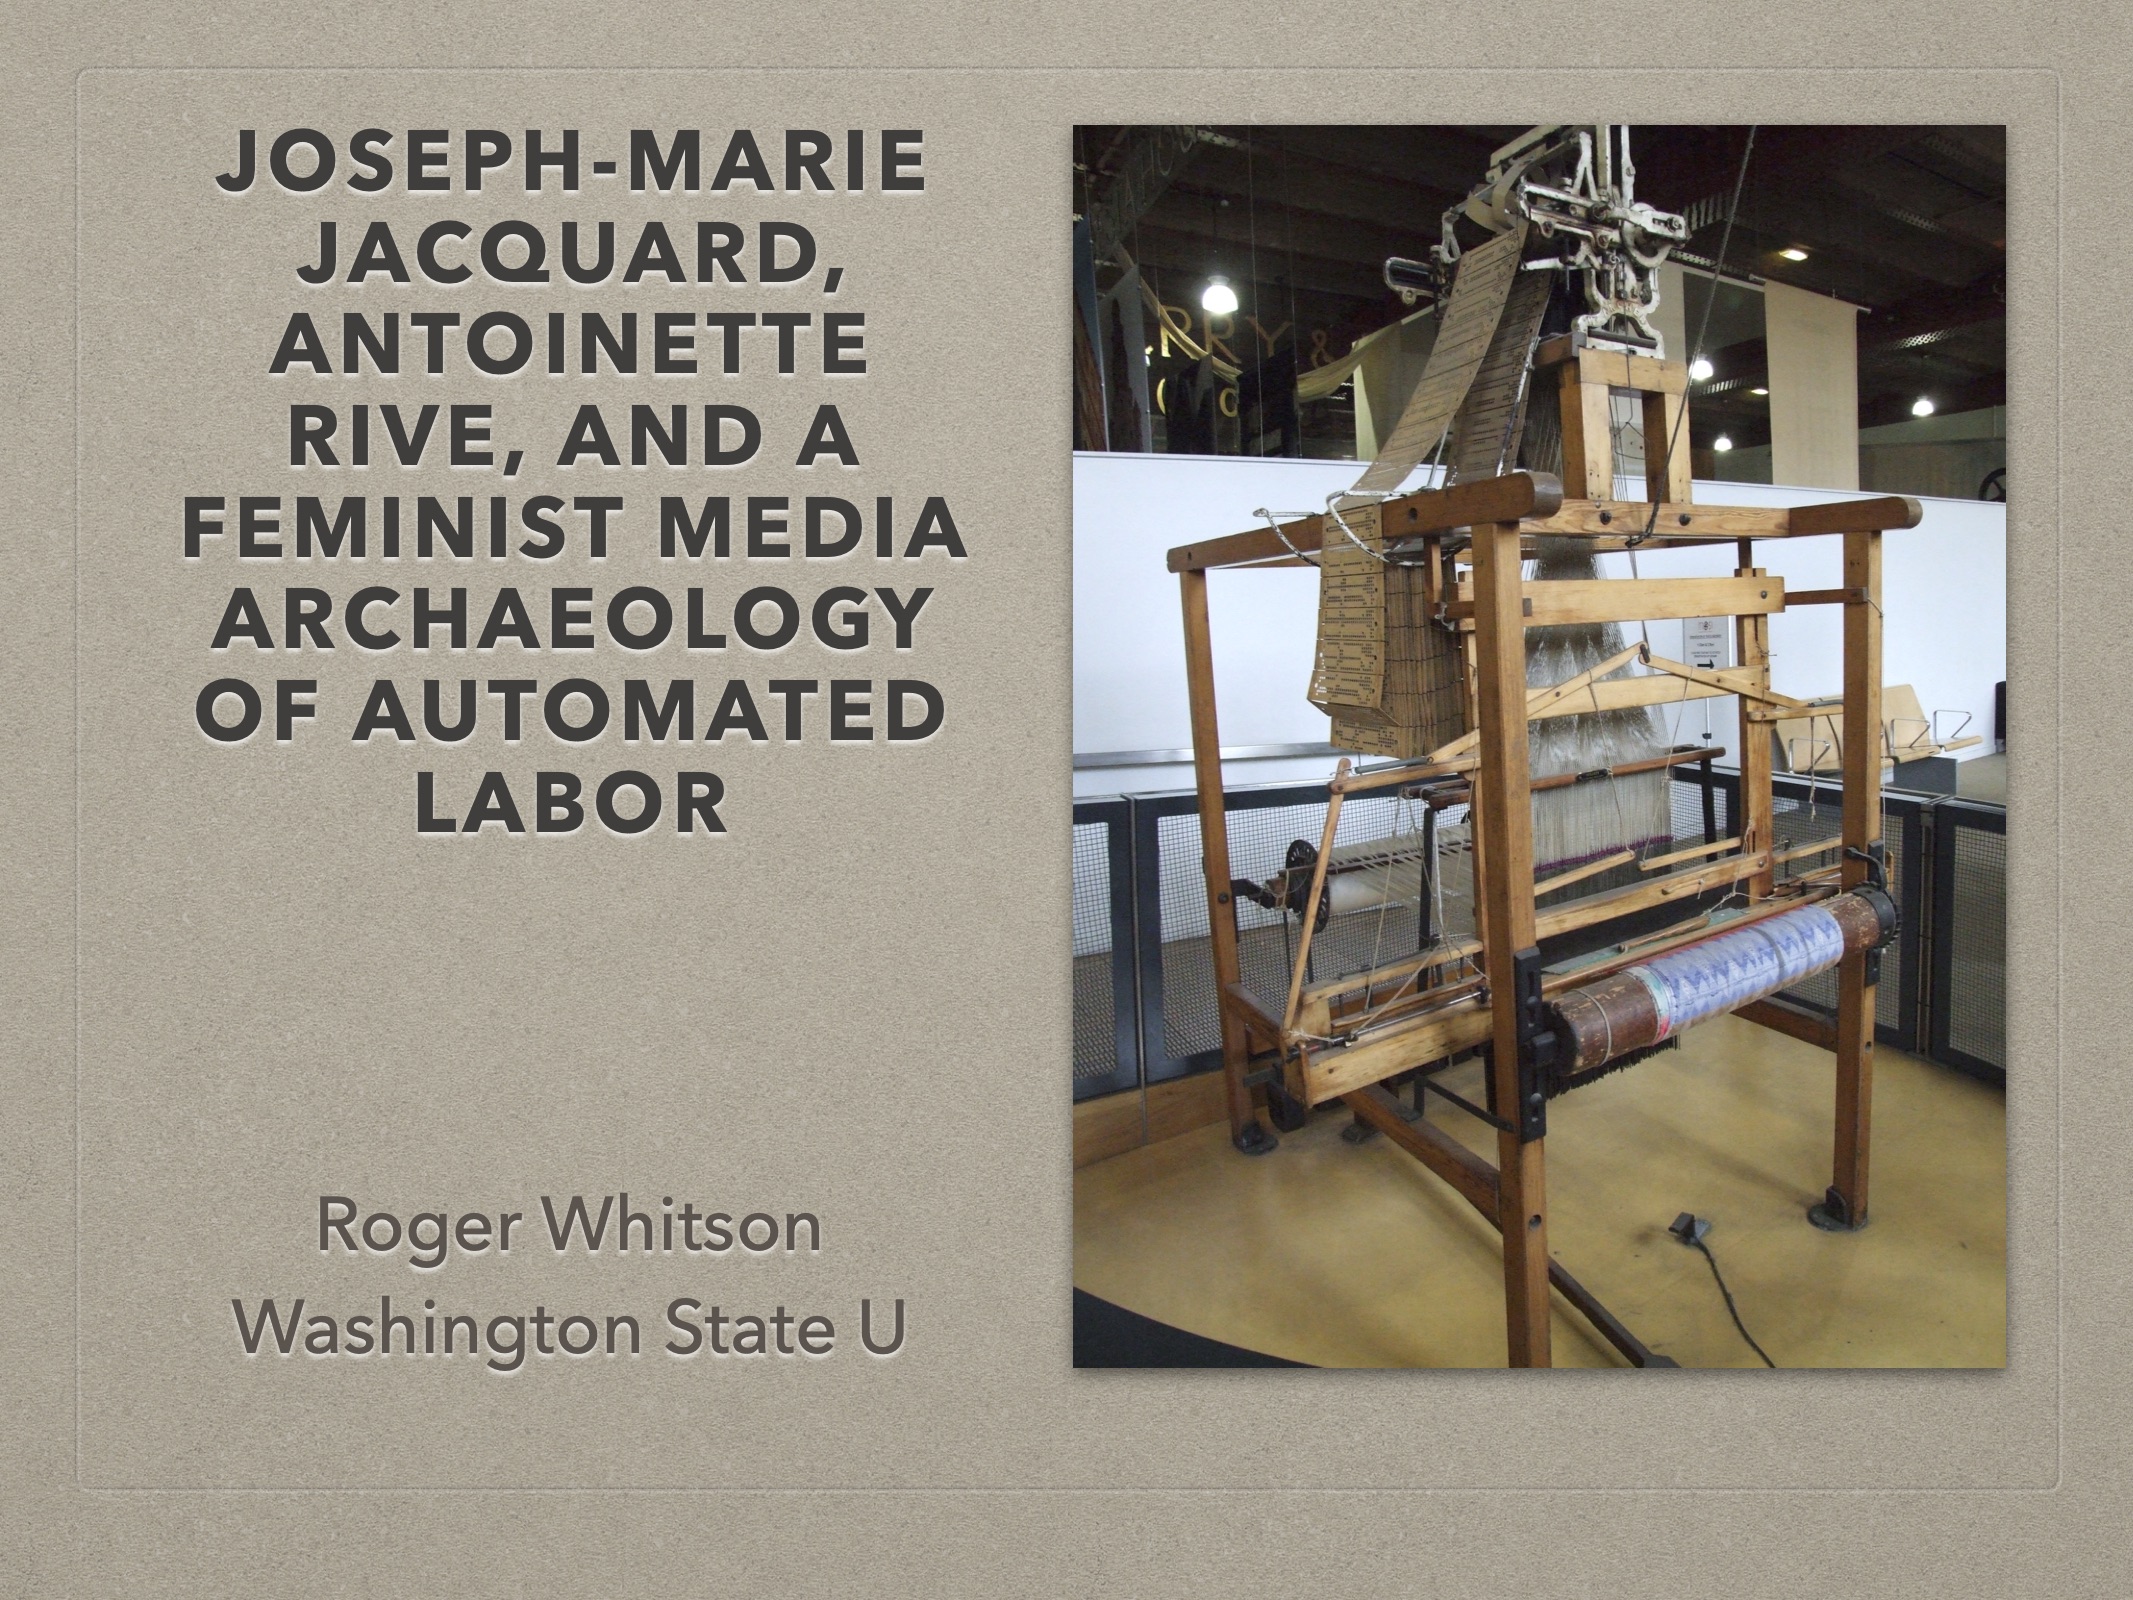 Joseph Marie Jacquard, Antoinette Rive, and a Feminist Media Archaeology of Automated Labor – Roger Whitson